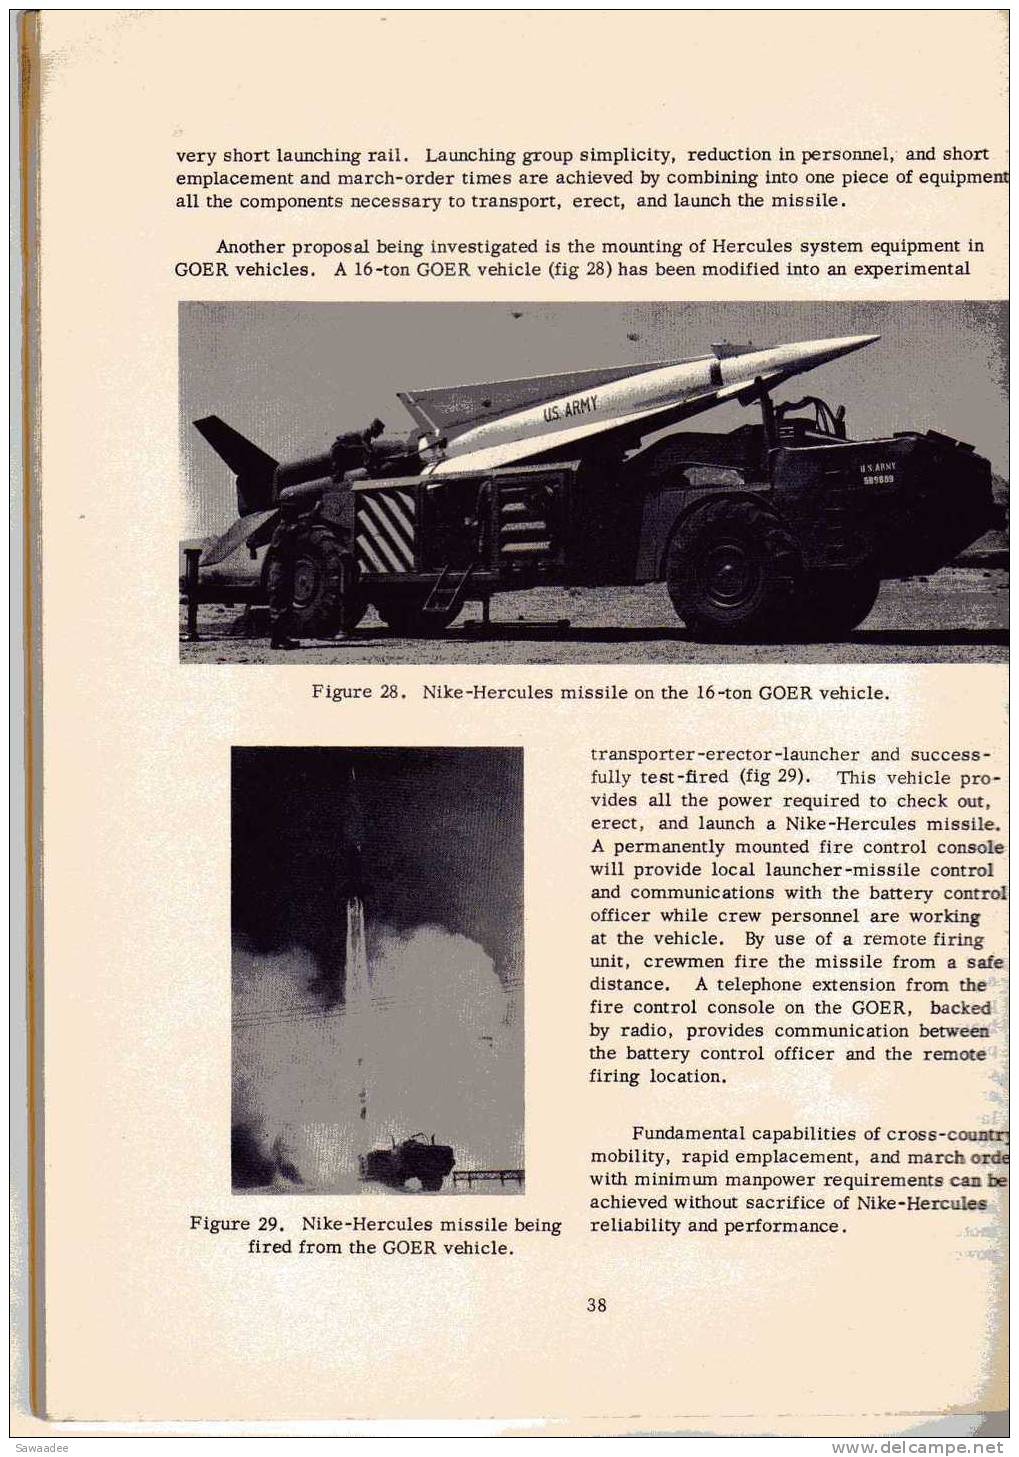 DOCUMENT - MILITARIA  - U.S. ARMY AIR DEFENSE -  FORT BLISS - TEXAS - 1962/63 - 78 PAGES - NBRES ILLUSTRATIONS, PHOTOS - Kriege US